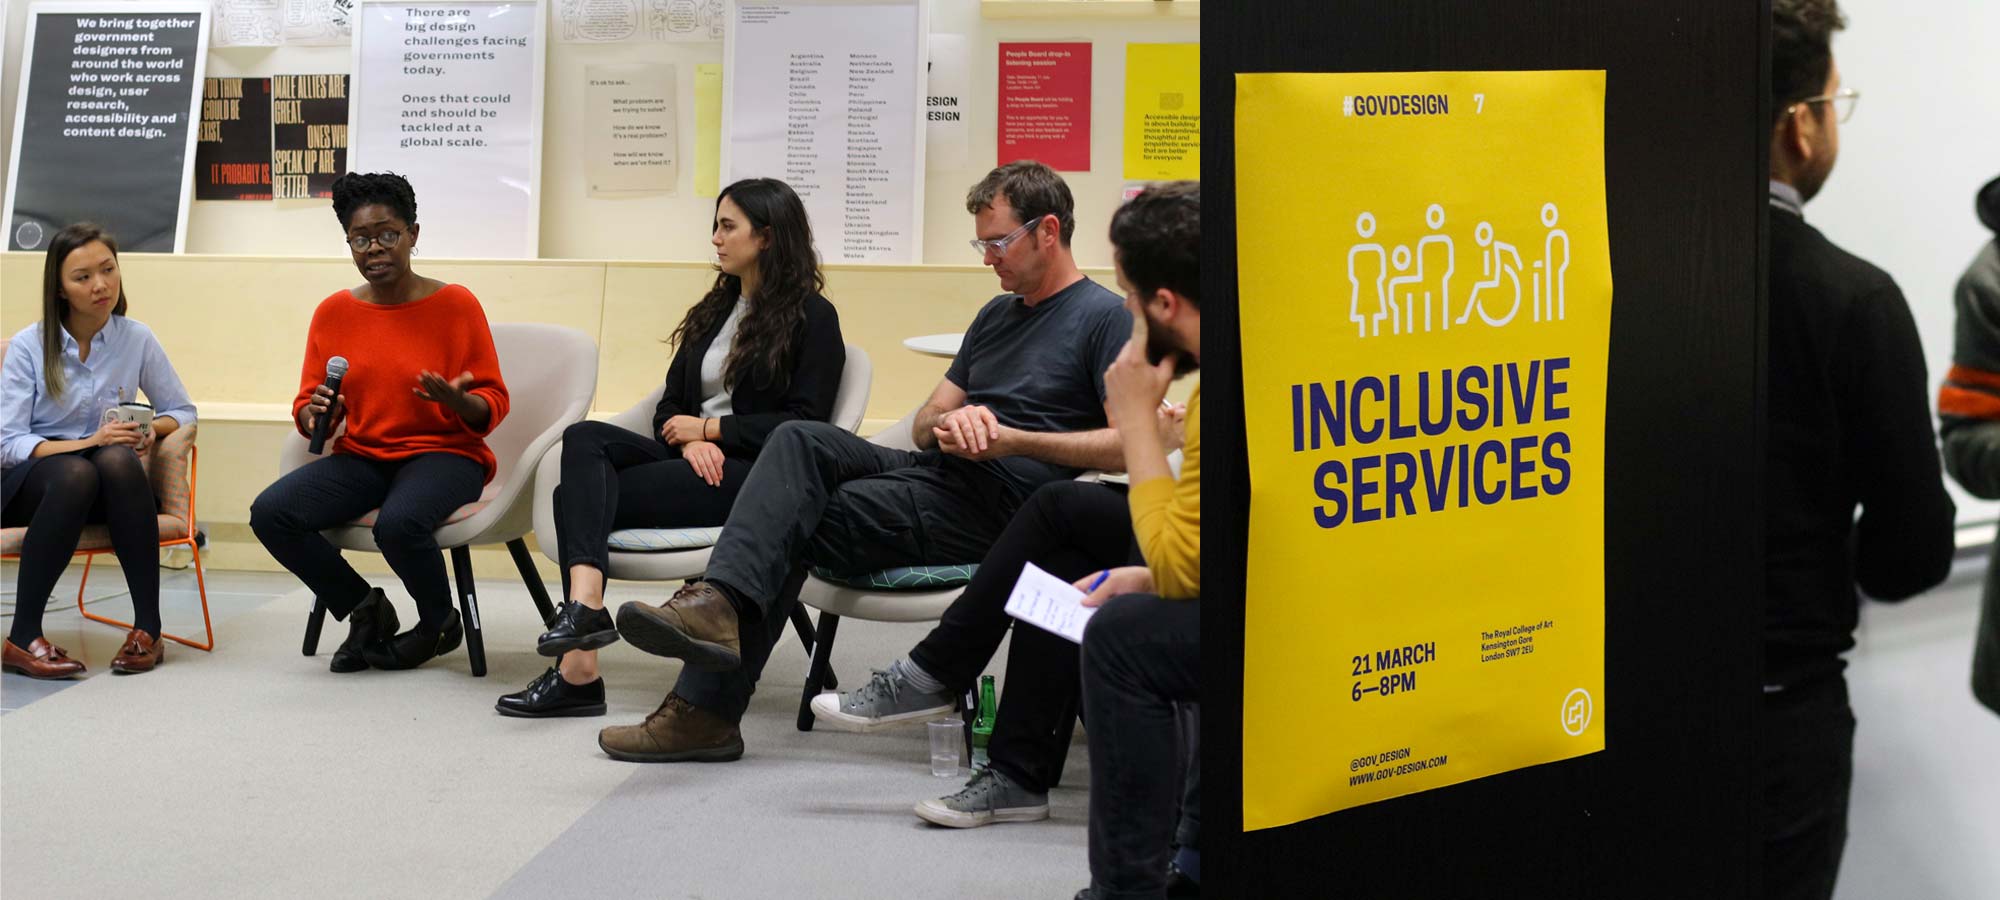 An ethically diverse discussion panel of meetup speakers, a poster for a gov design meetup on inclusive services